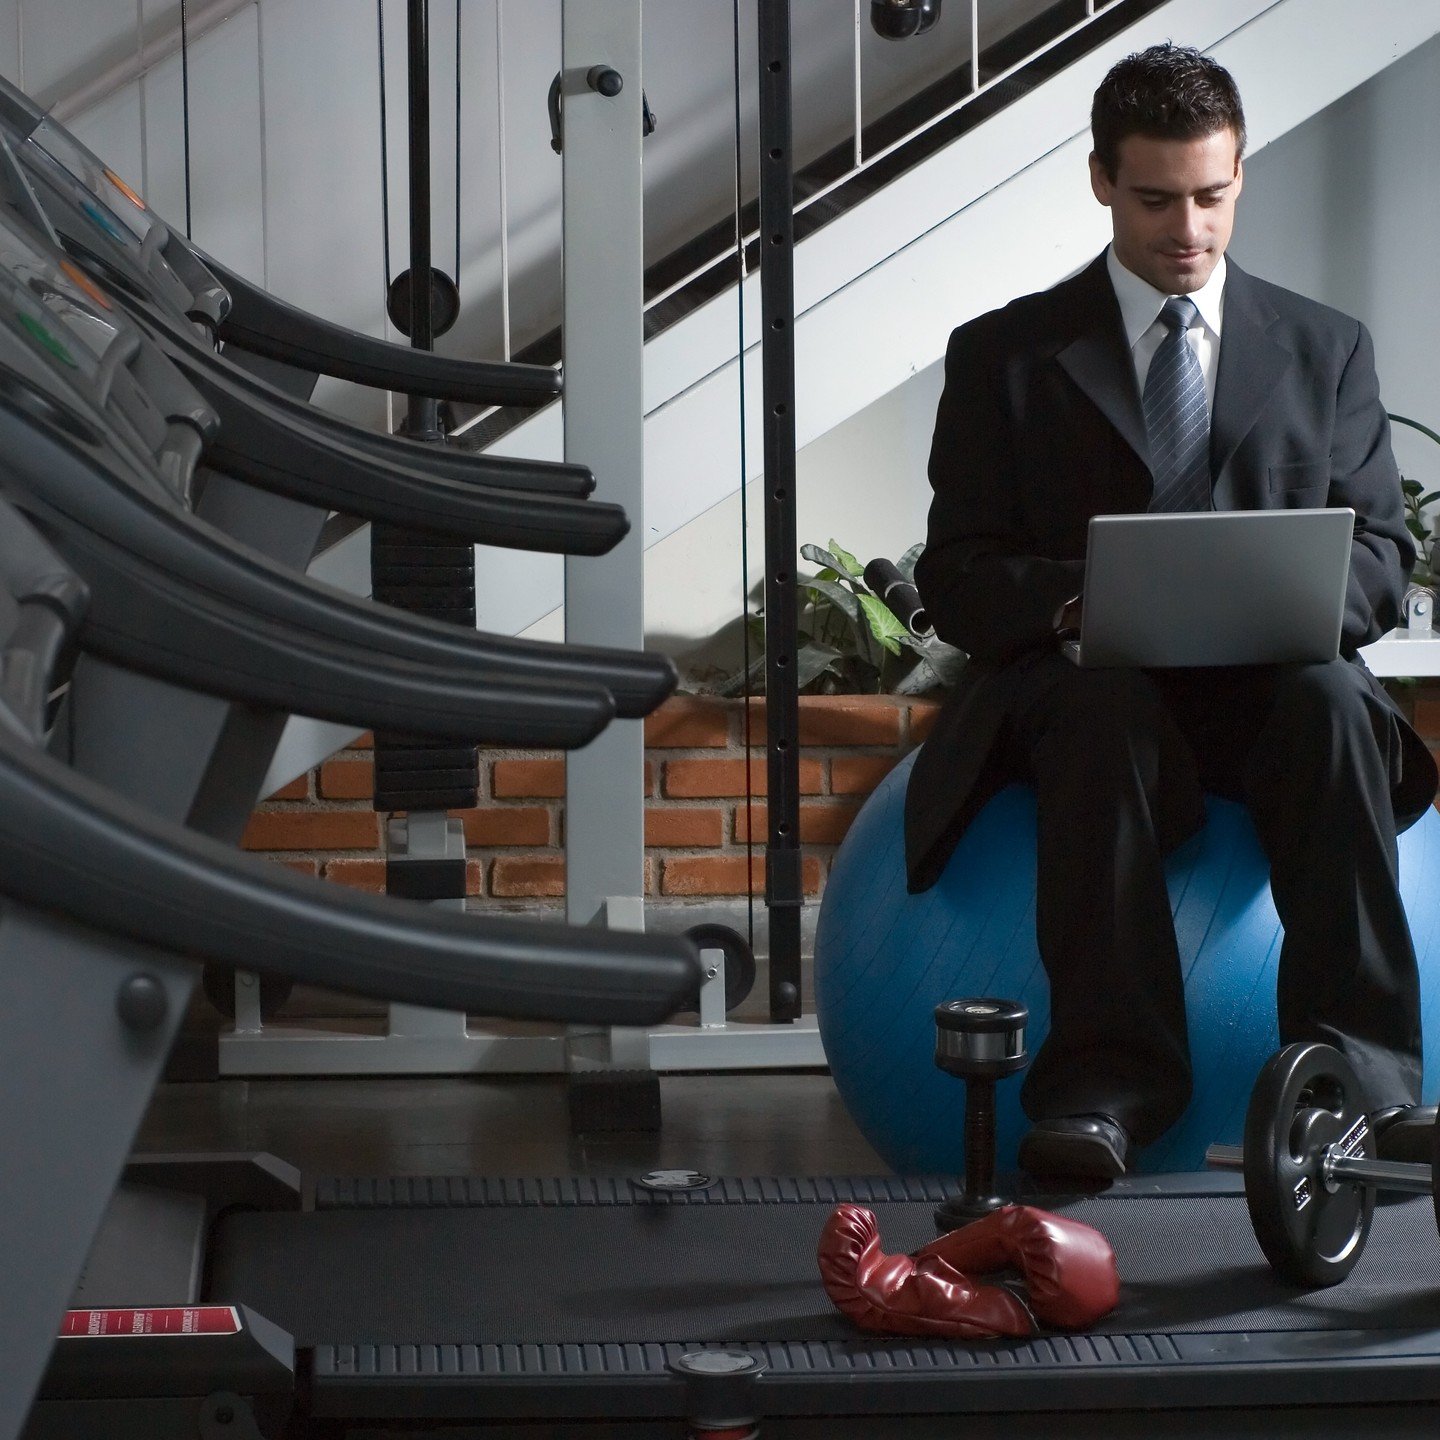 The Many Benefits of Working Out in the Workplace:

📍Increased Productivity
📍Stress Reduction
📍Enhanced Morale and Team Bonding
📍Prevention of Lifestyle Diseases

#corporate #corporatefitness #stressreduction #teambonding #corporateenvironments #